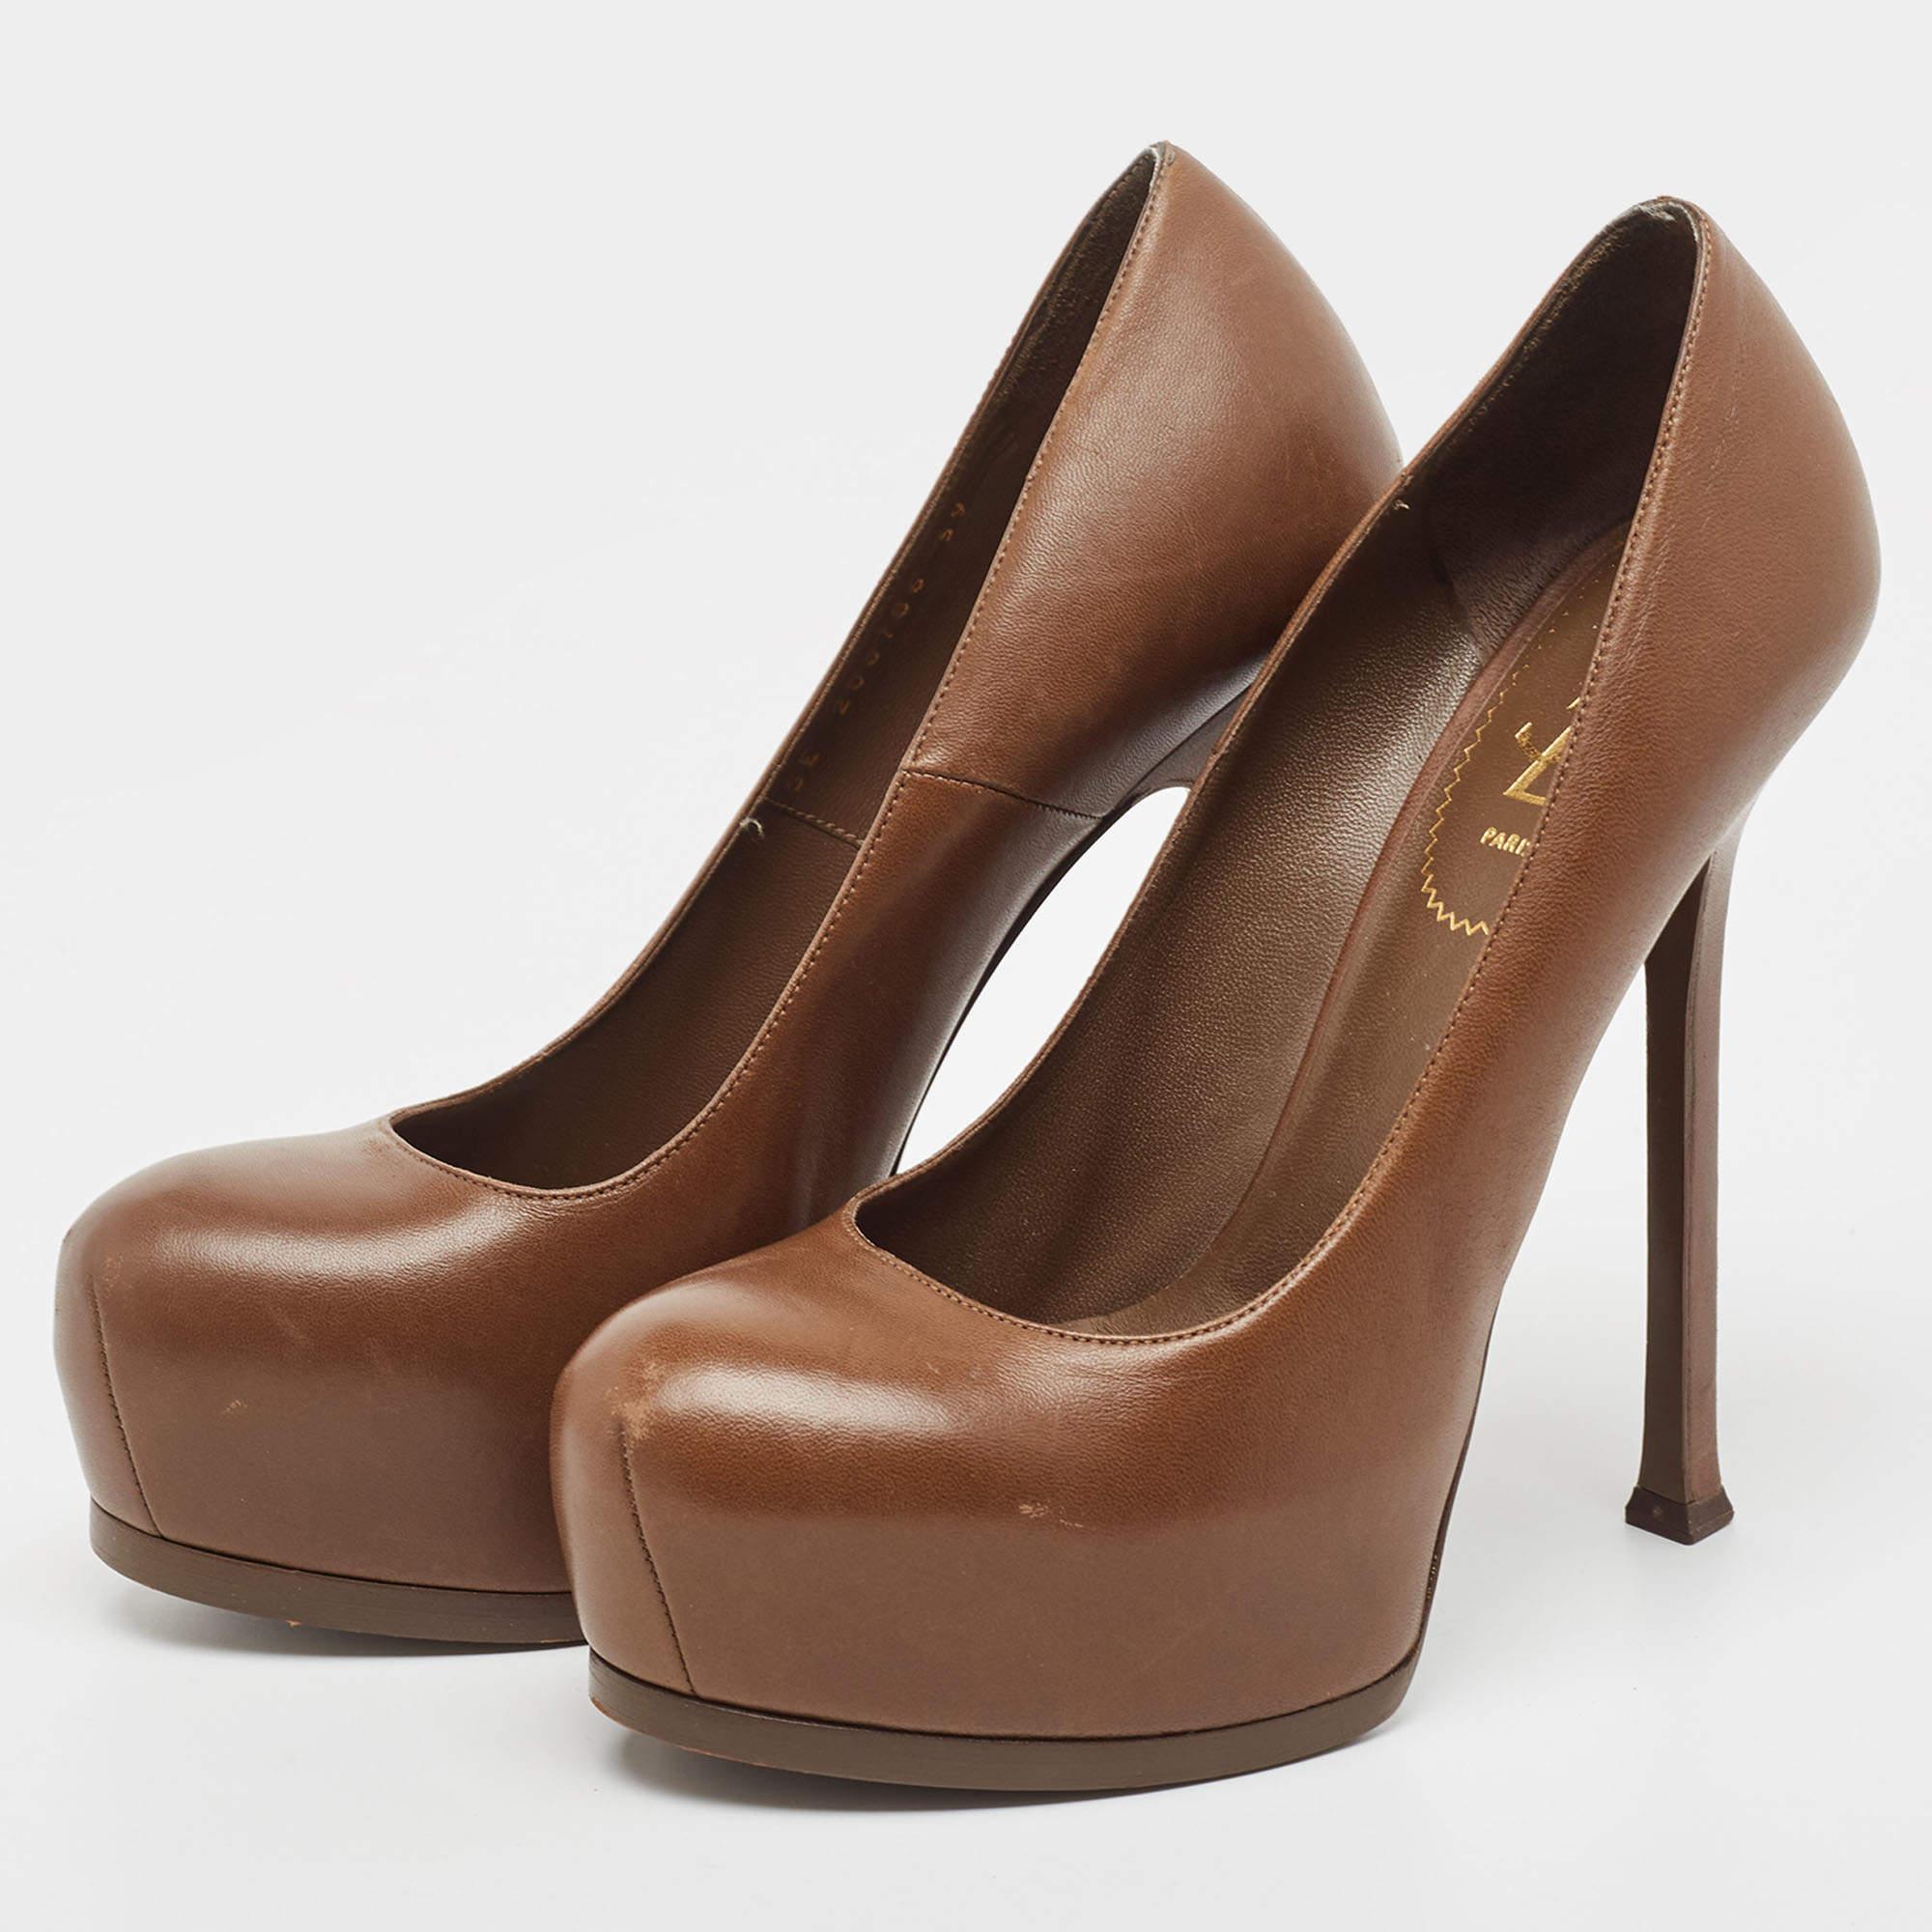 These timeless pumps by Saint Laurent showcase the right mix of charm and elegance. Made from brown leather, they come with covered toes, platforms, and 16 cm heels. These pumps will complement formals as well as casuals.

